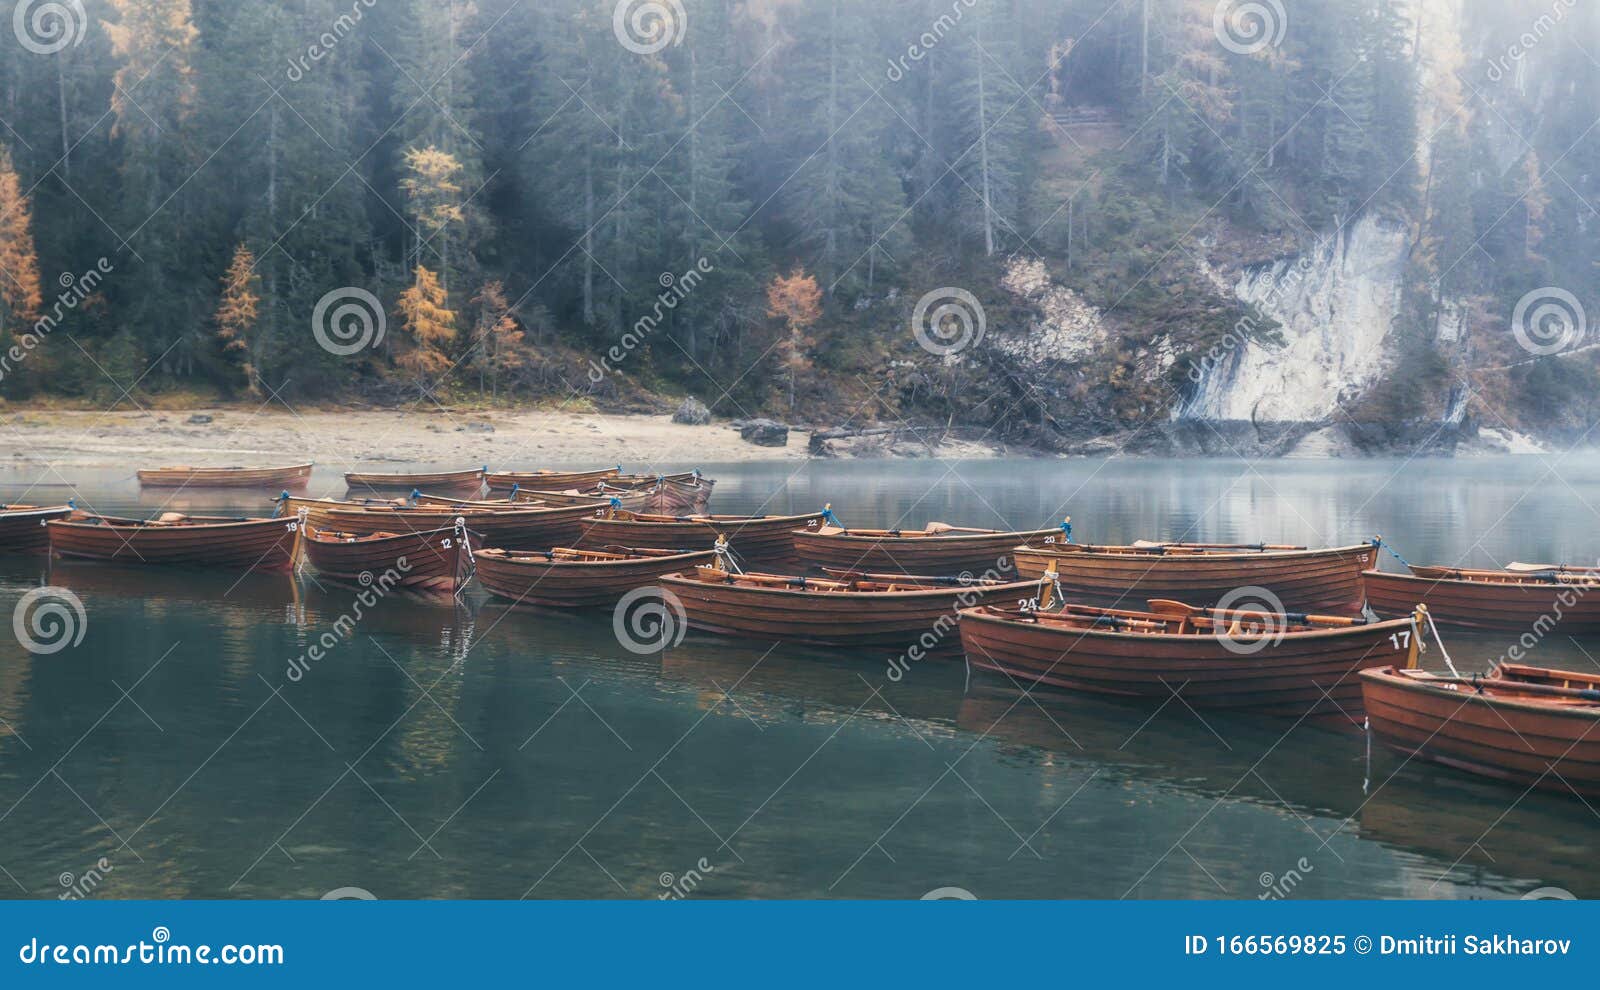 emerald waters of lago di braies and wooden boats